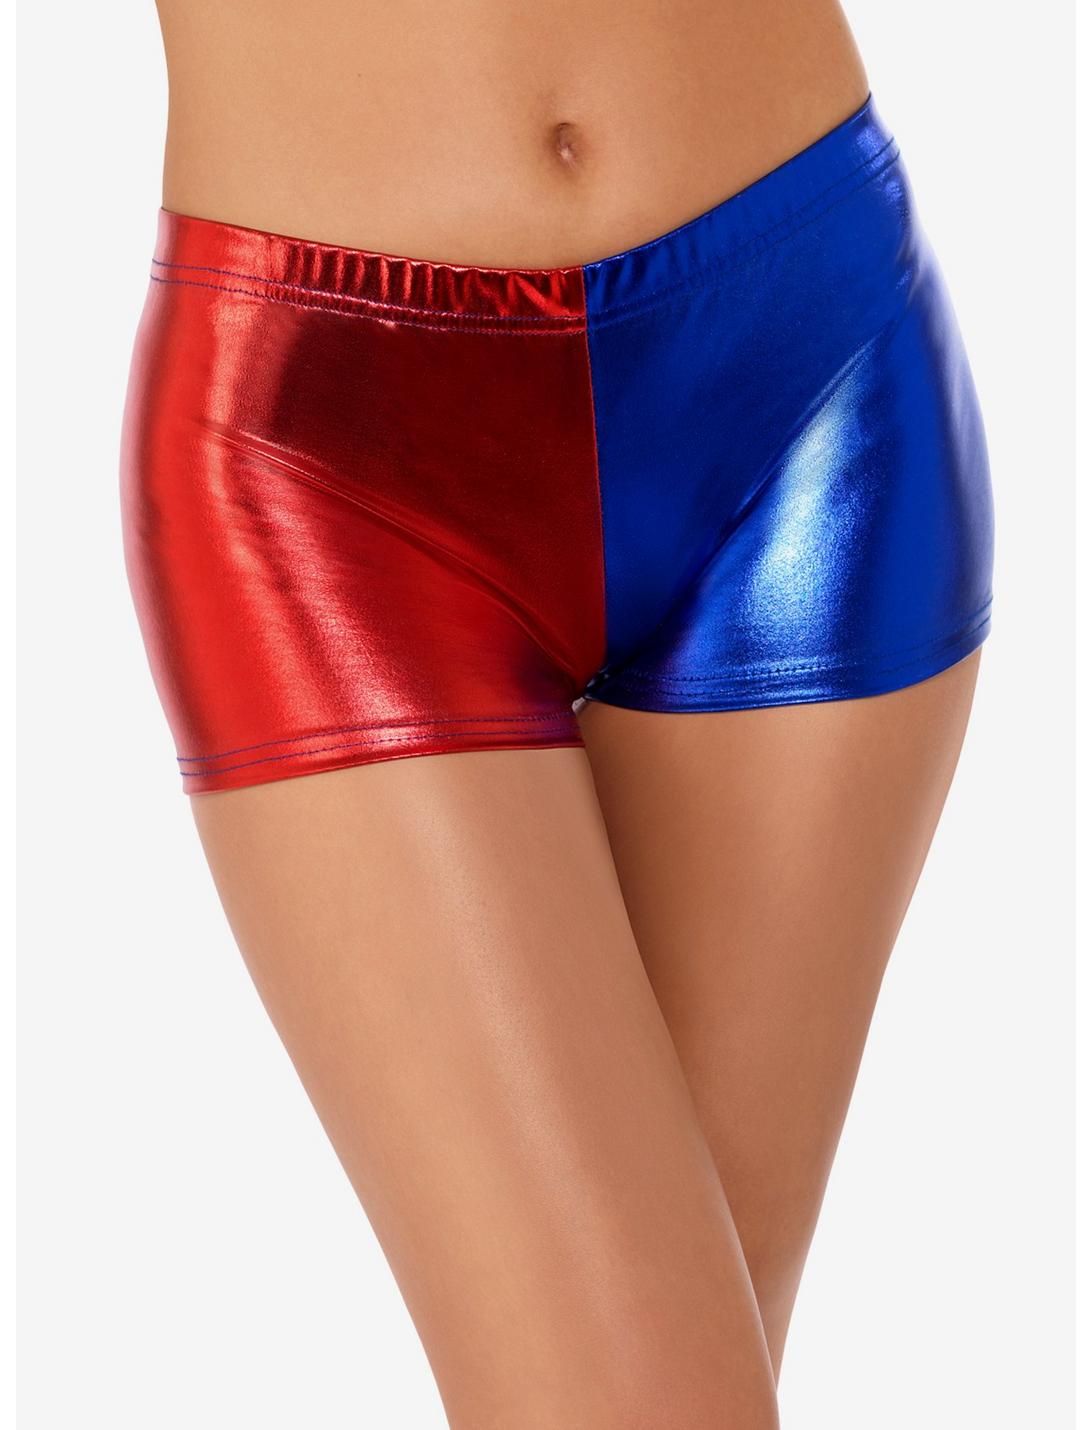 Miss Jester Shorts, RED, hi-res